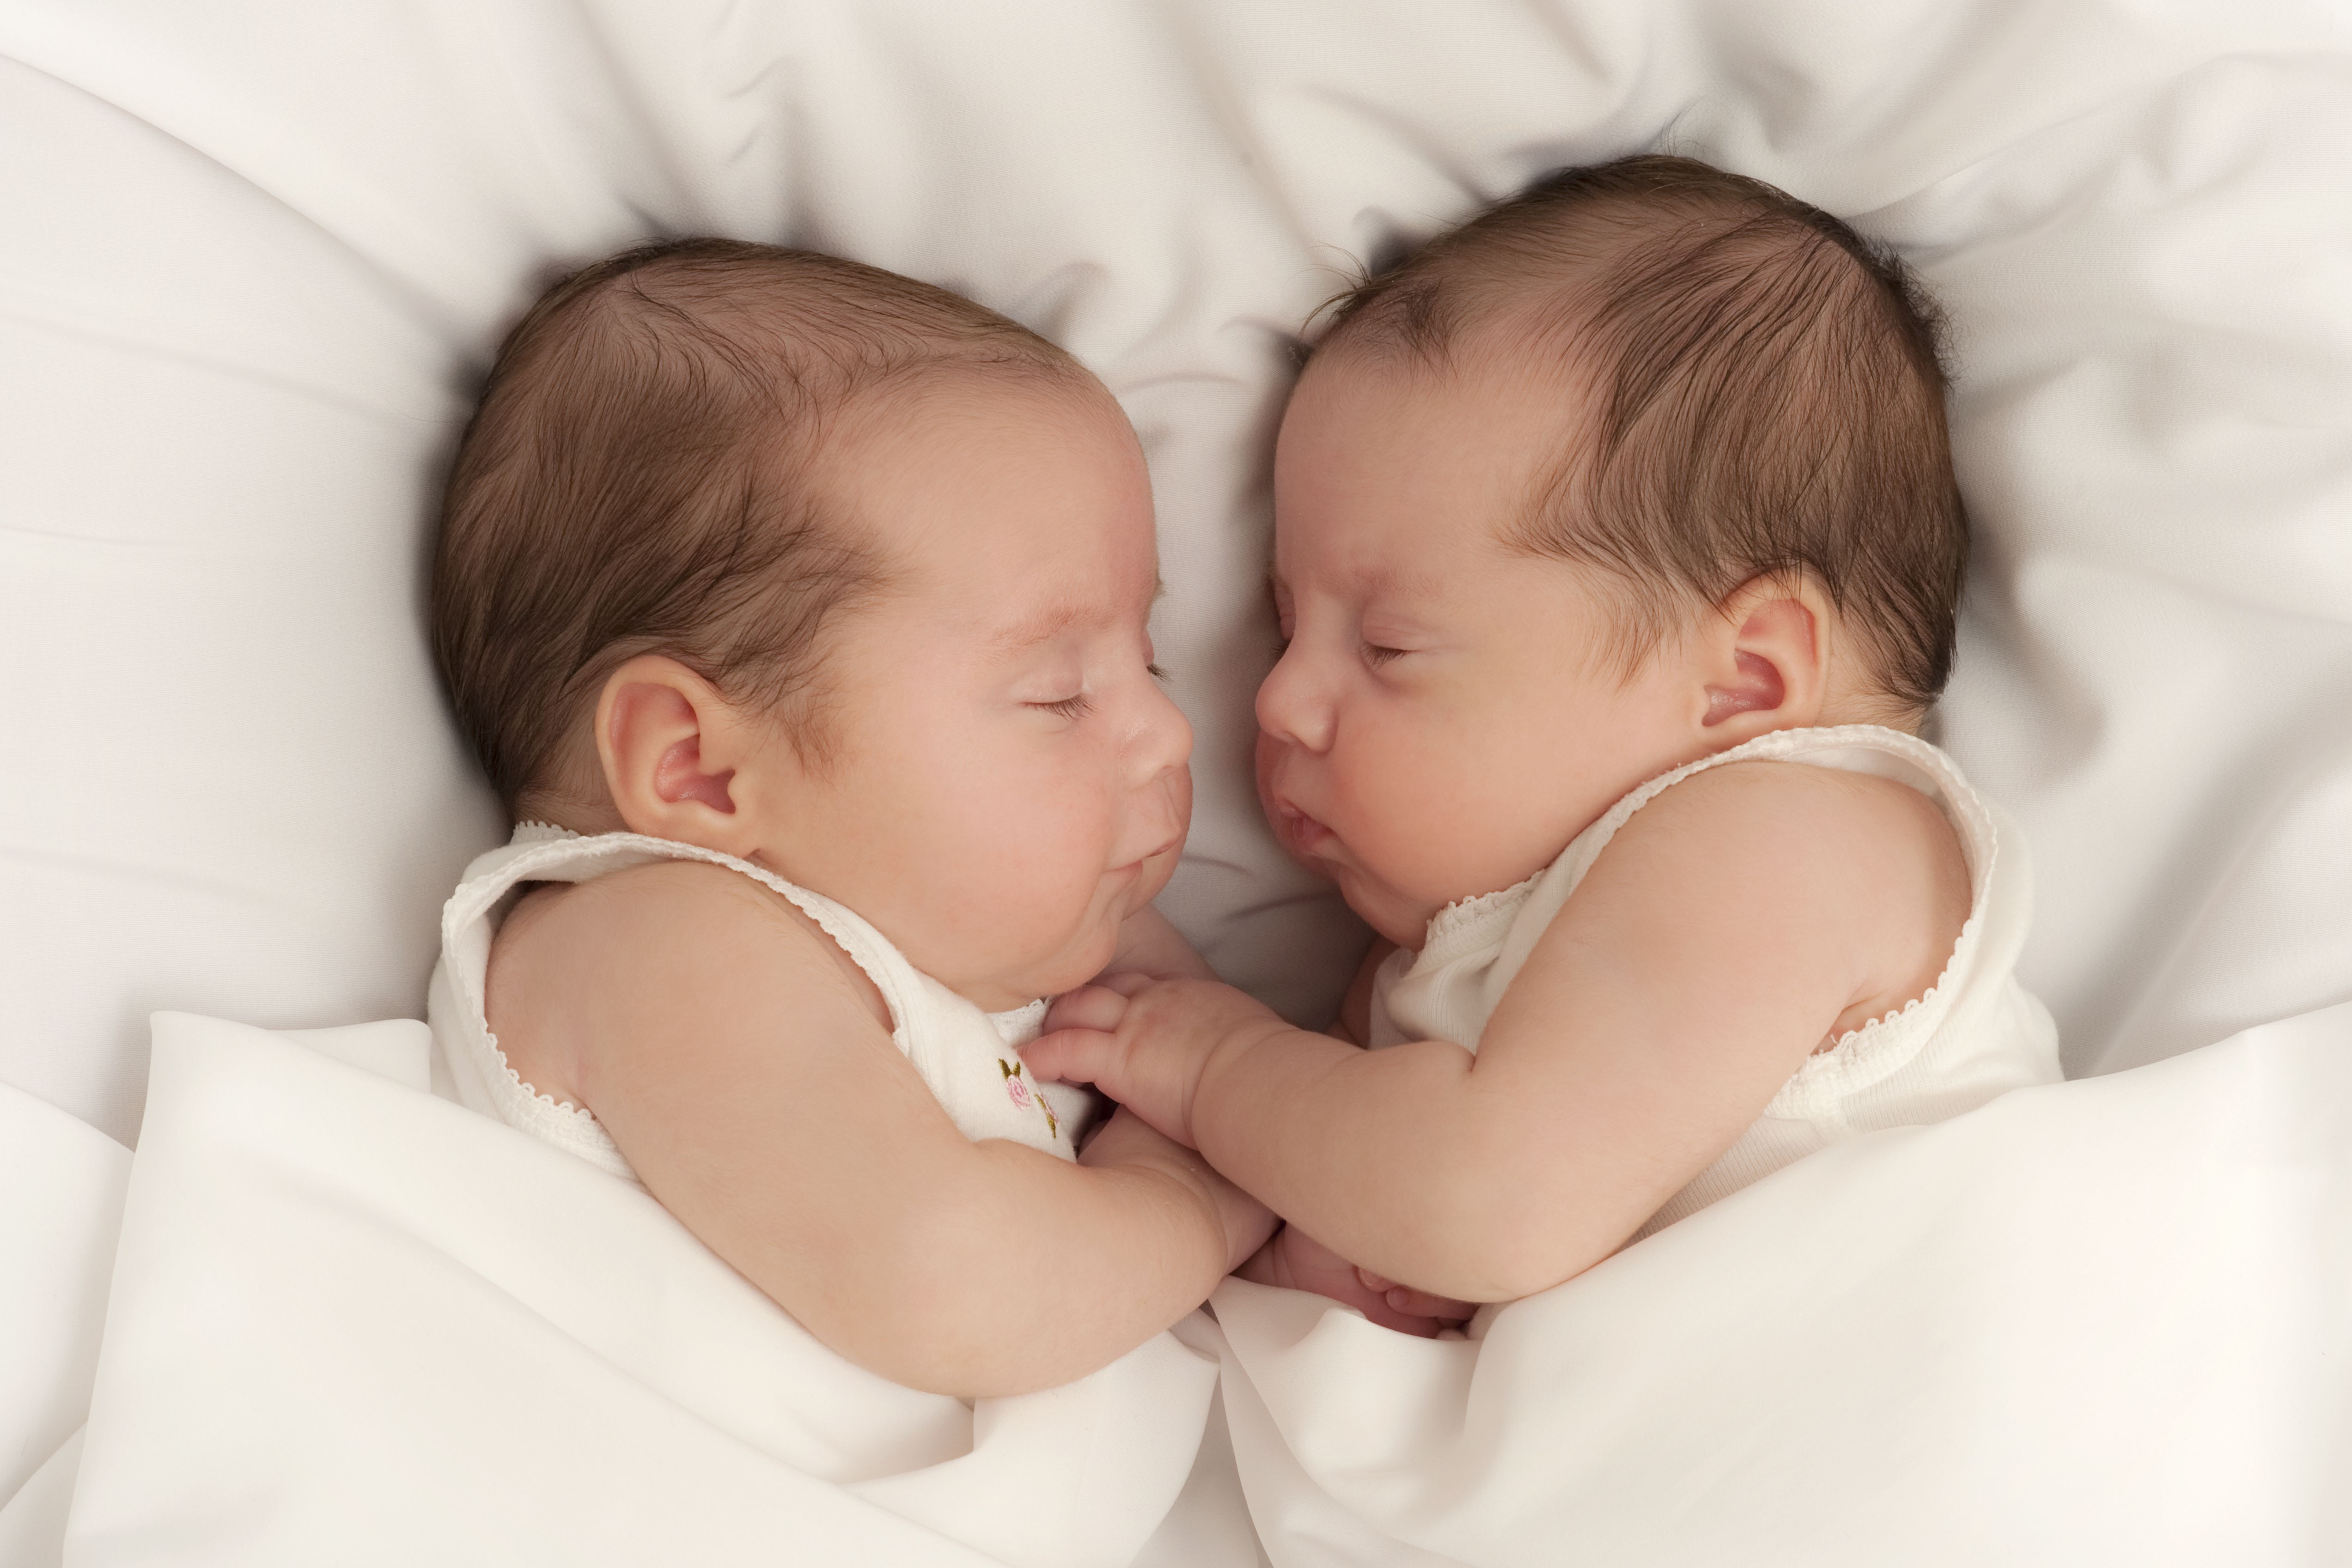 15 Sets of Spanish Baby Names for Twins